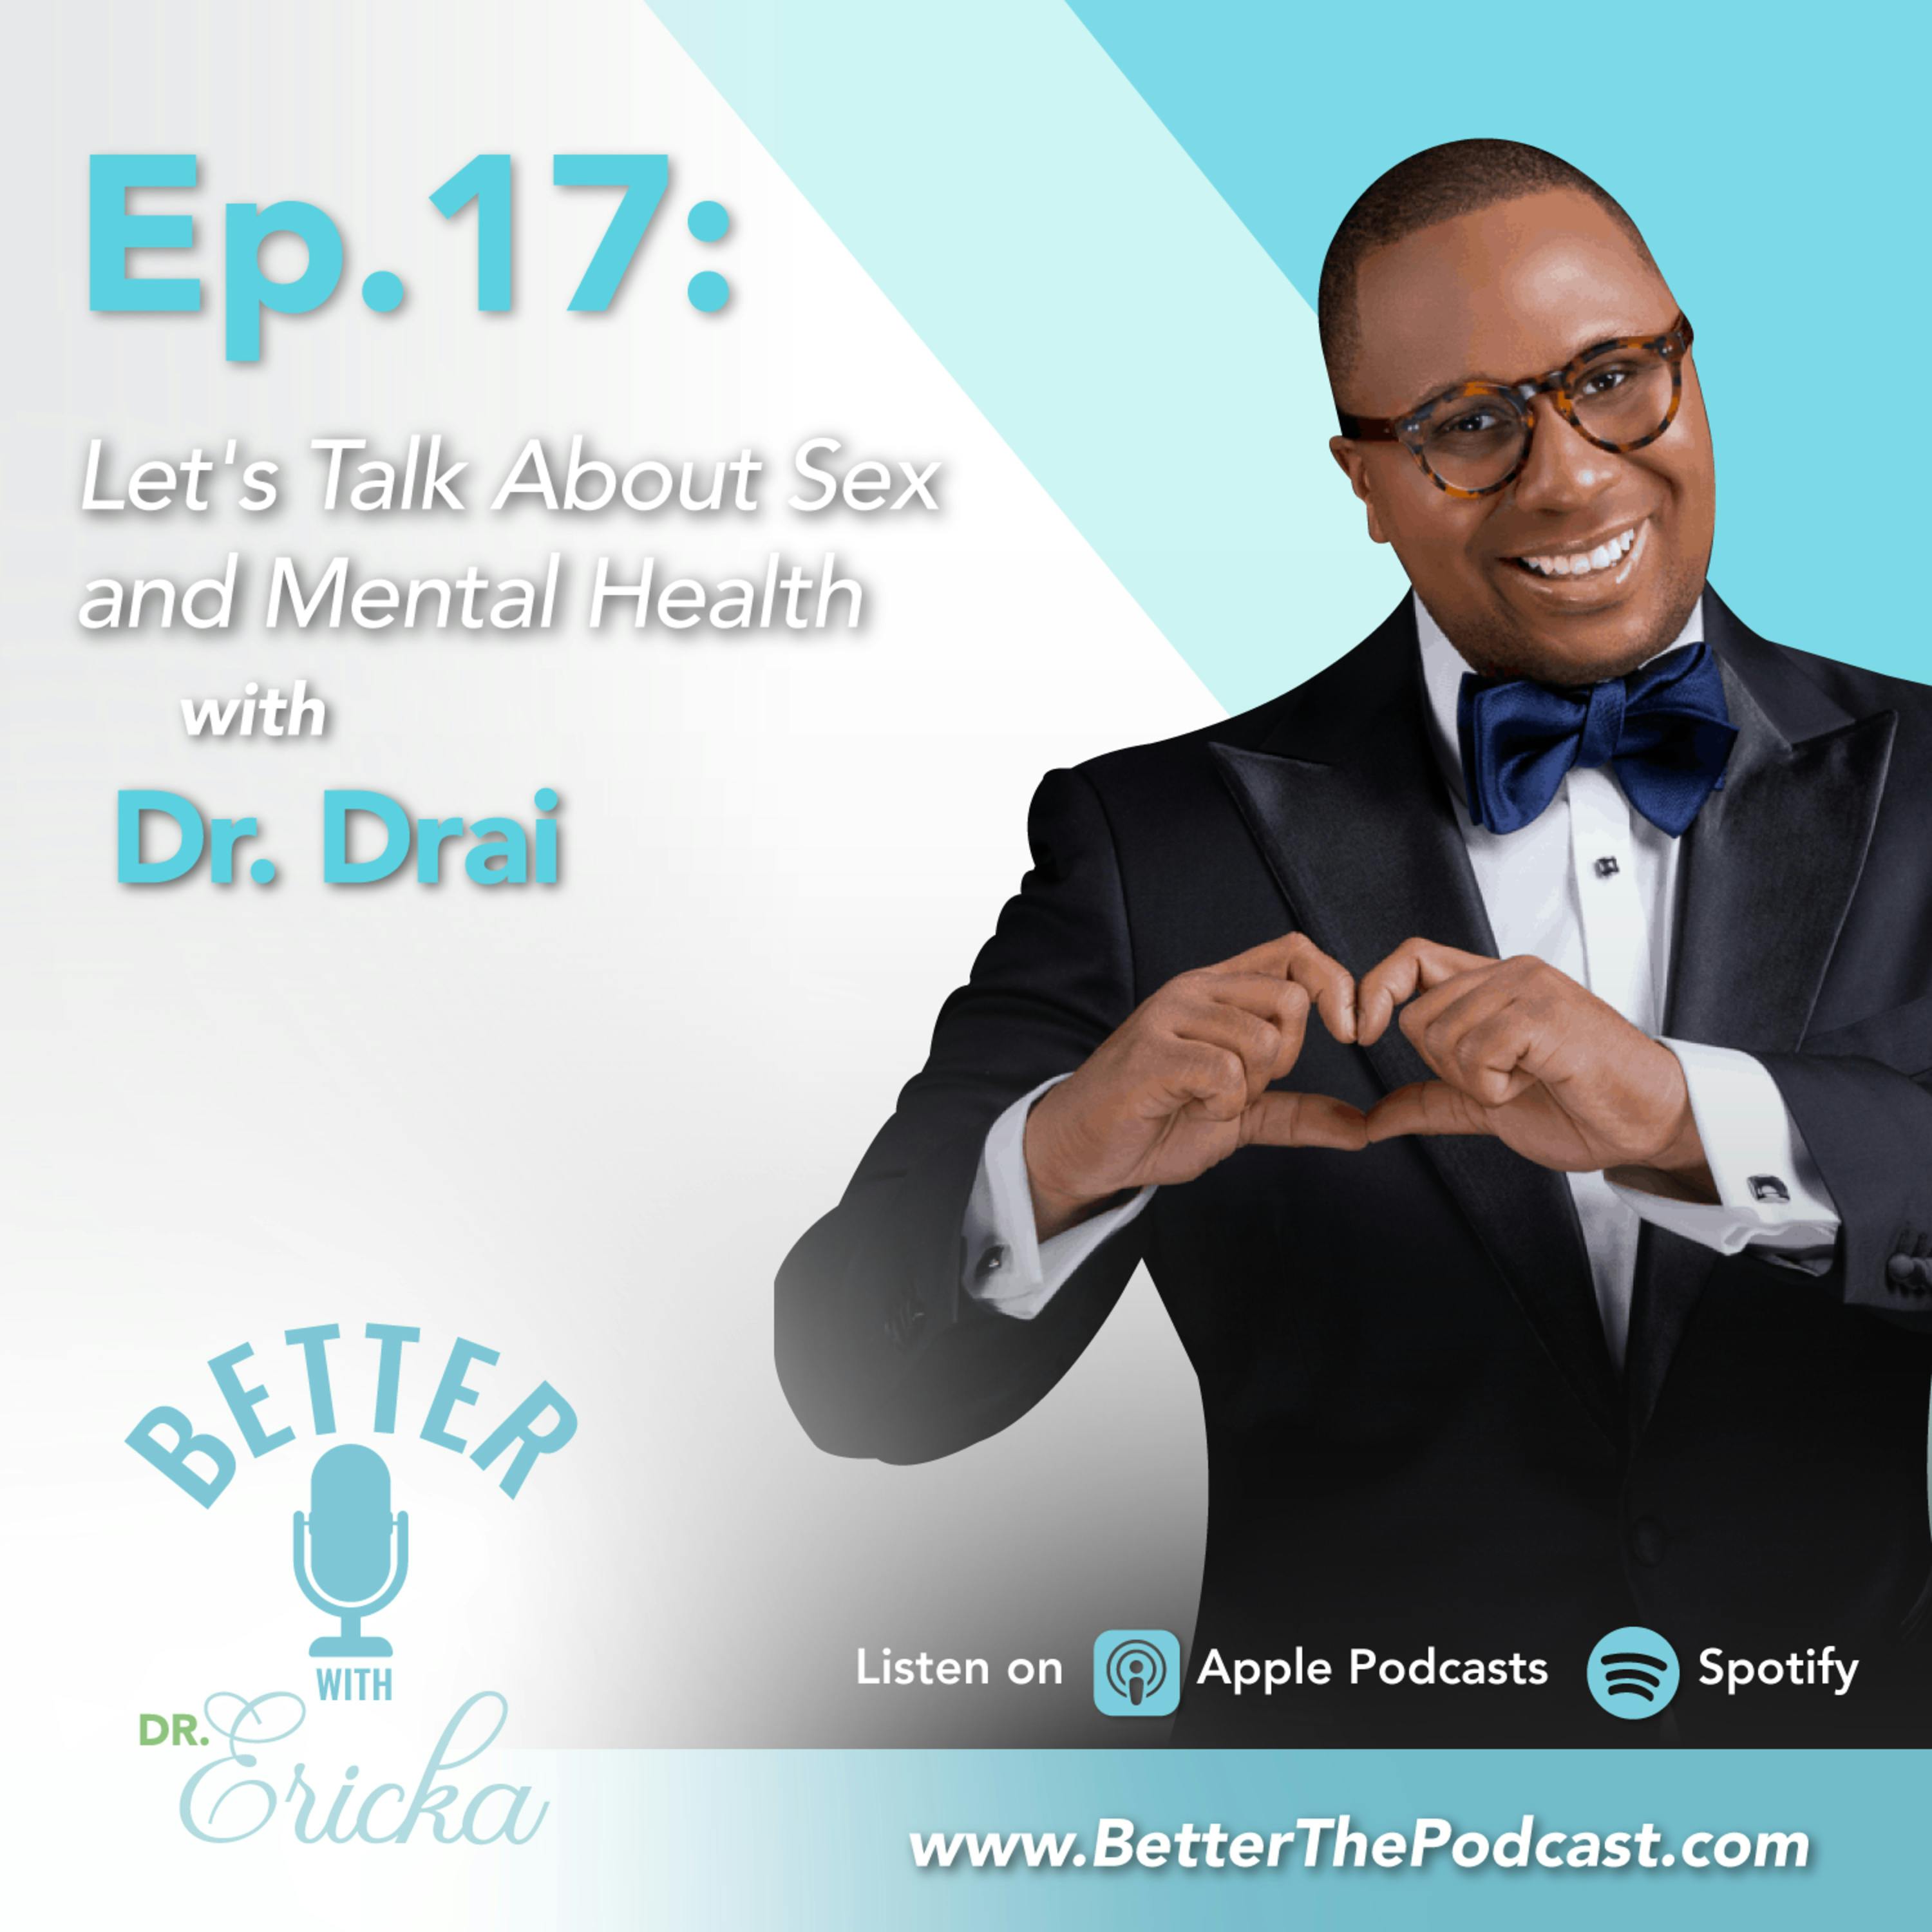 Let’s Talk About Sex and Mental Health with Dr. Drai